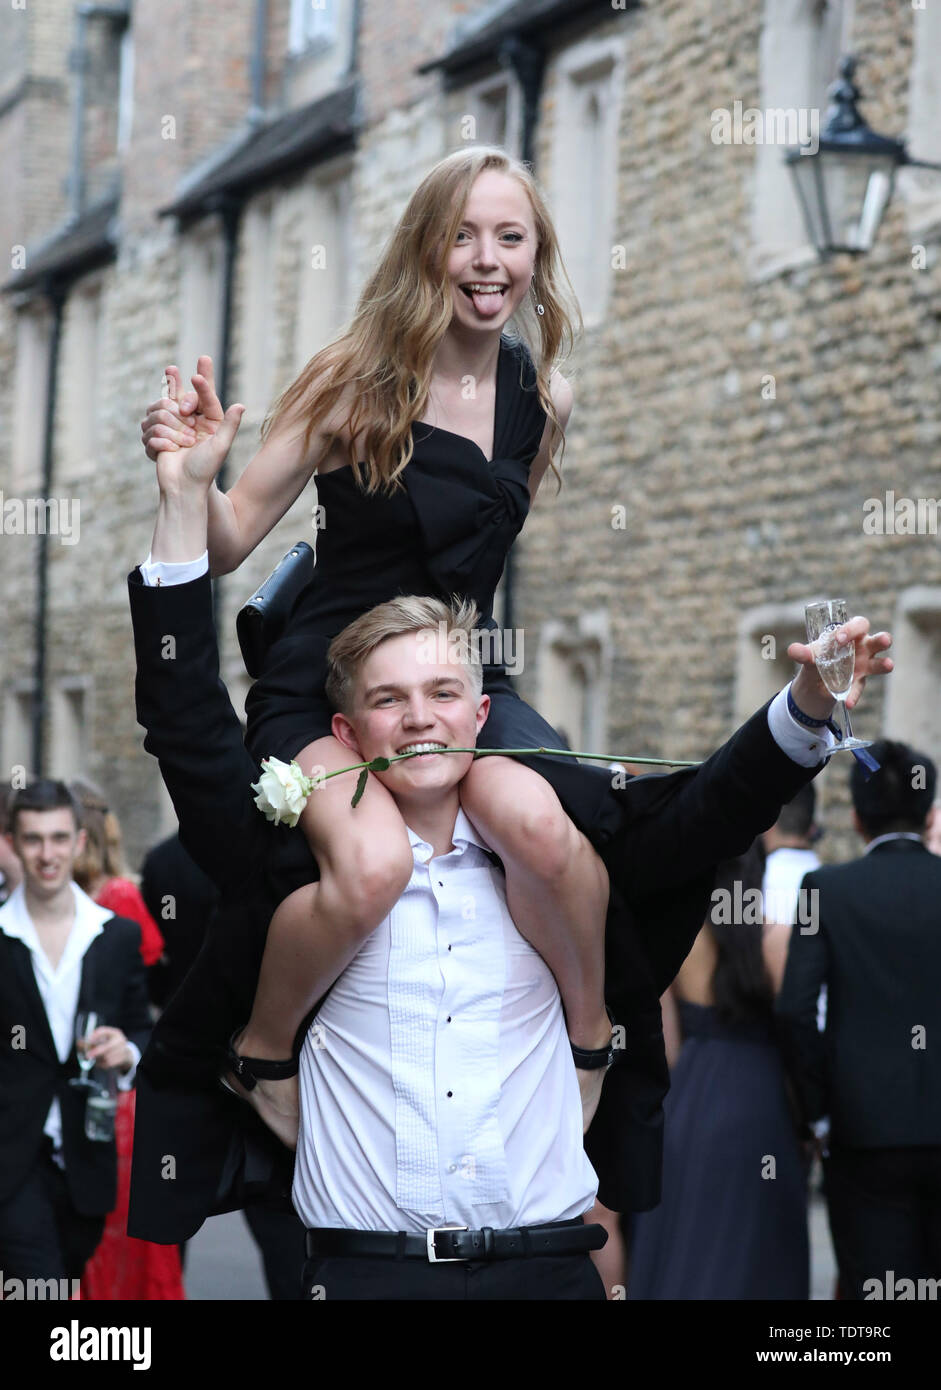 Cambridge, Cambridgeshire, UK. 18th June, 2019. University students make their way home in the early hours of the morning after celebrating the end of their exams and attending the Trinity May Ball, Cambridge, Cambridgeshire, on June 18, 2019. Credit: Paul Marriott/Alamy Live News Stock Photo